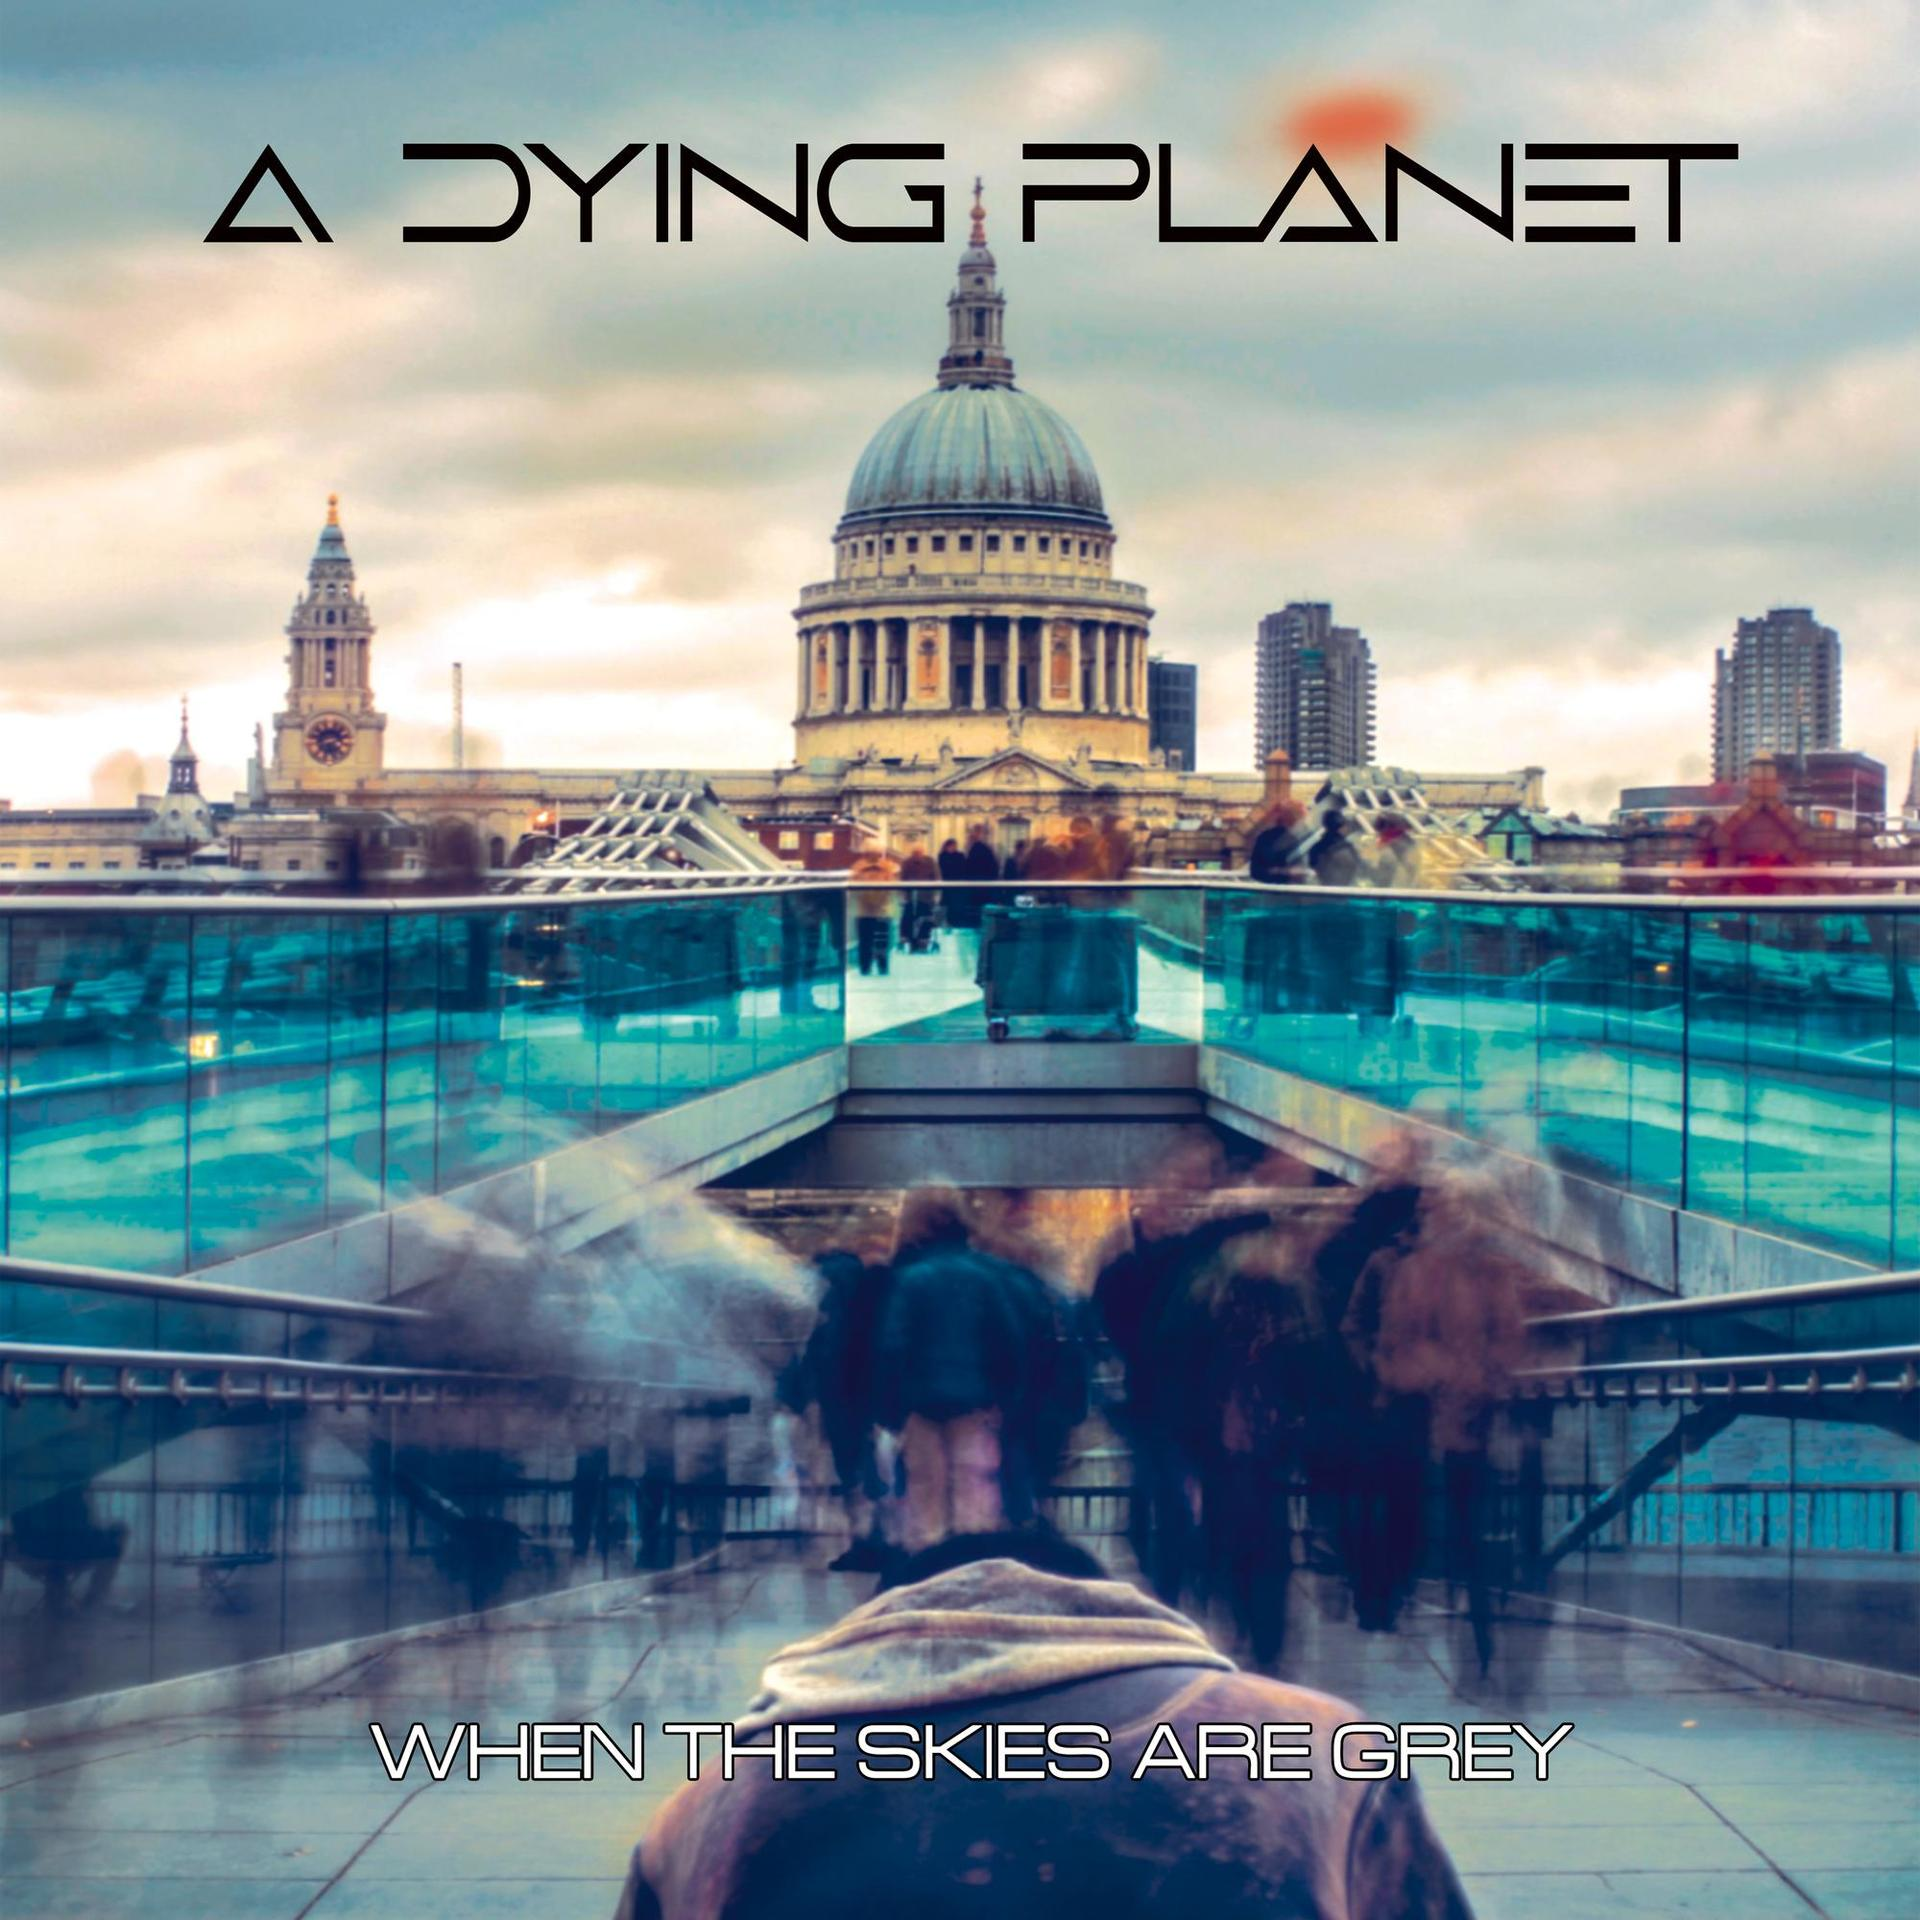 When (Vinyl) Planet The Dying A - - Grey Skies Are